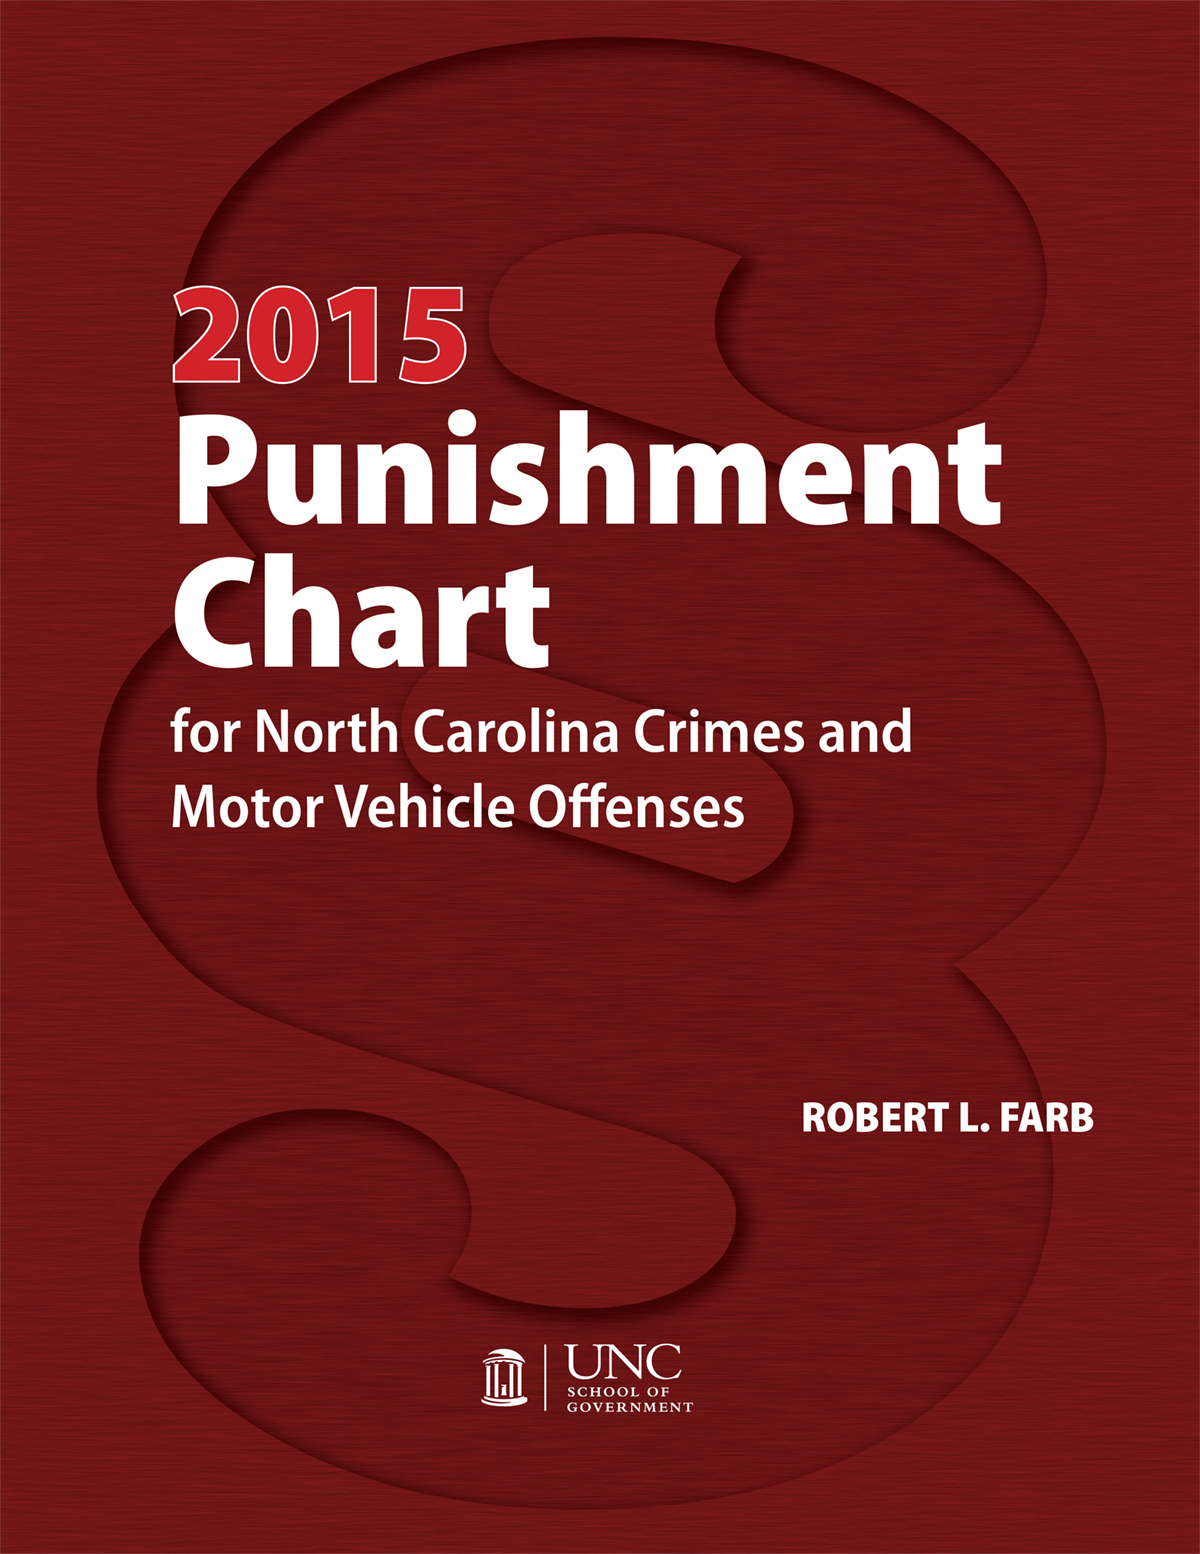 2015 Punishment Chart for North Carolina Crimes and Motor Vehicle Offenses